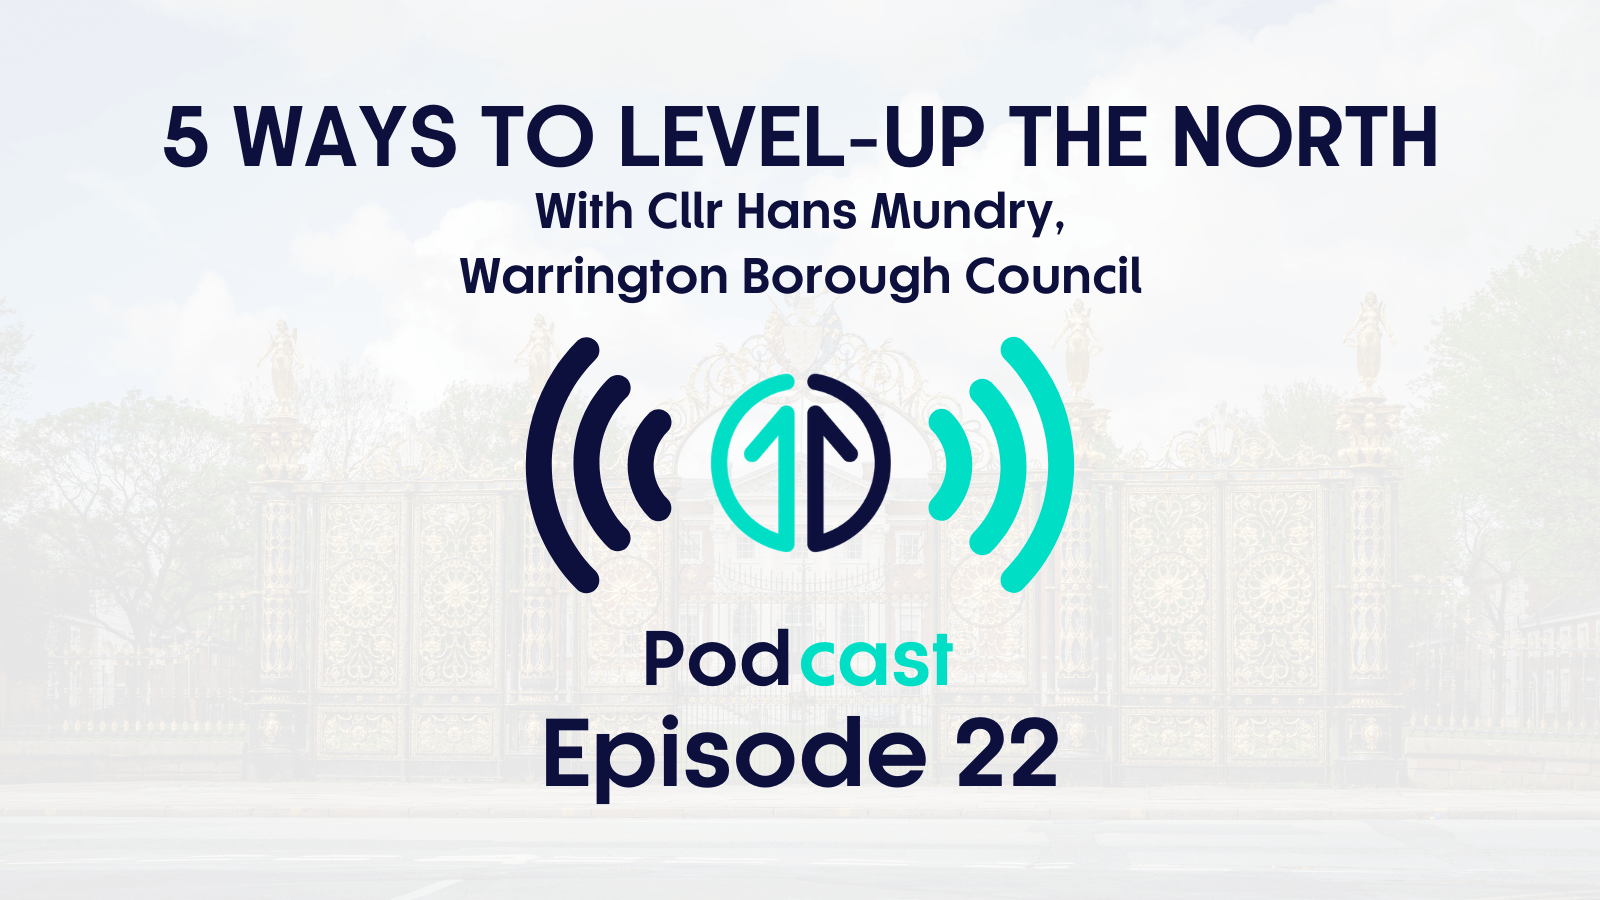 5 ways to level up the North with Cllr Hans Mundry